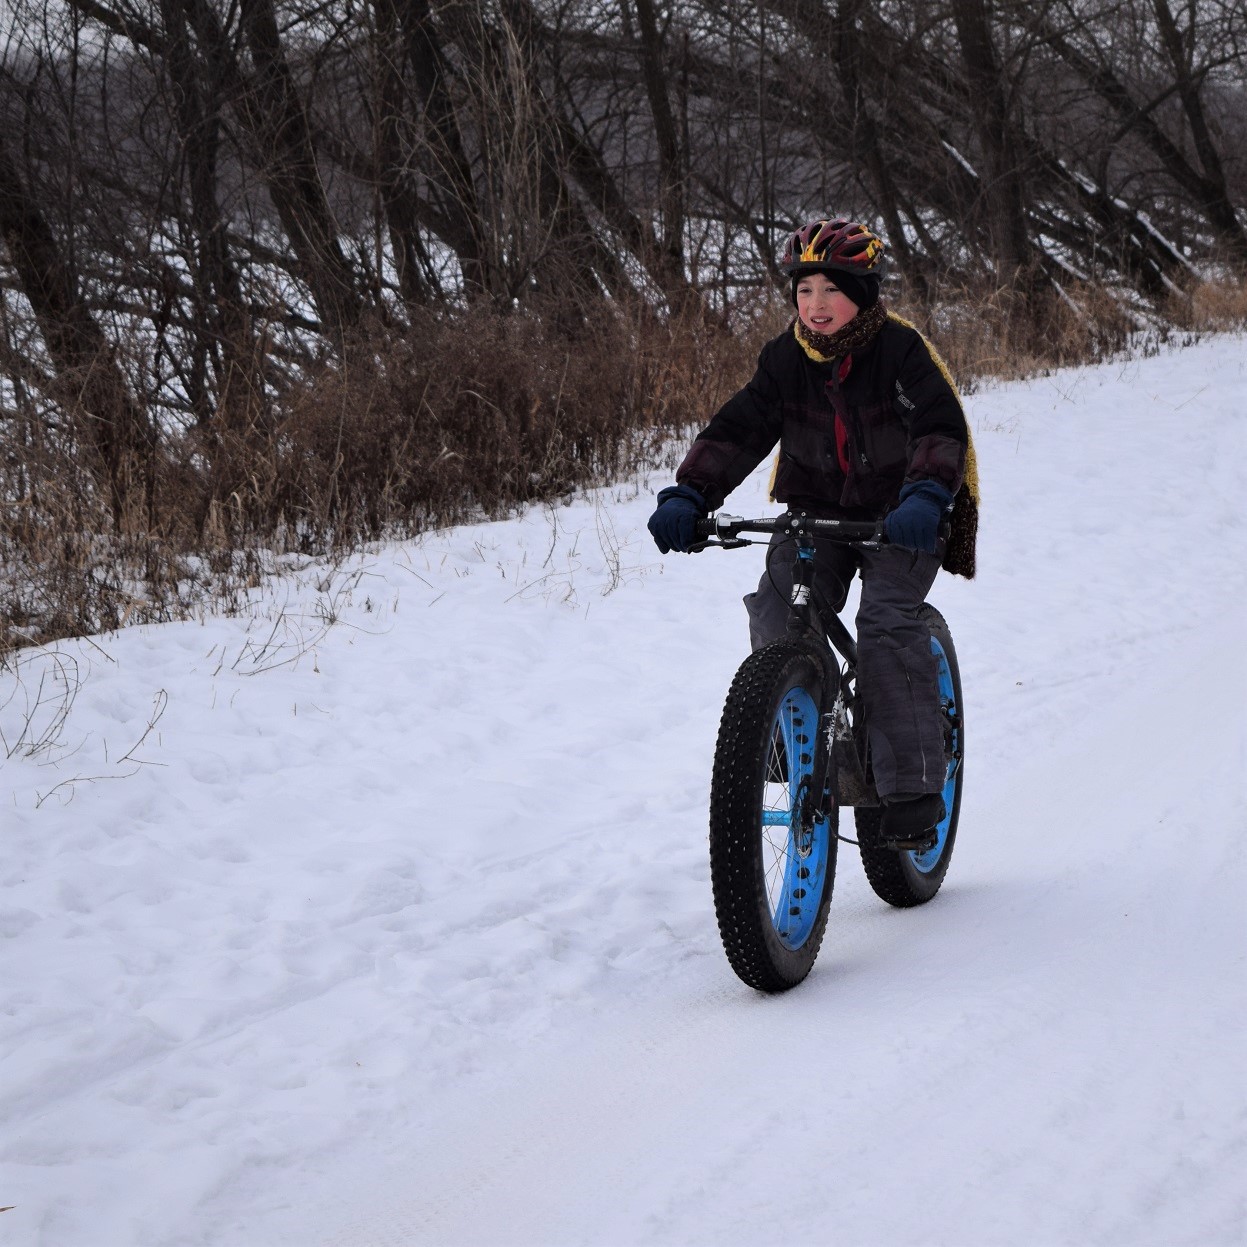 Bikes with low tire pressure offer more stability on slippery roads. Adding studs to the bikes tires adds more control.